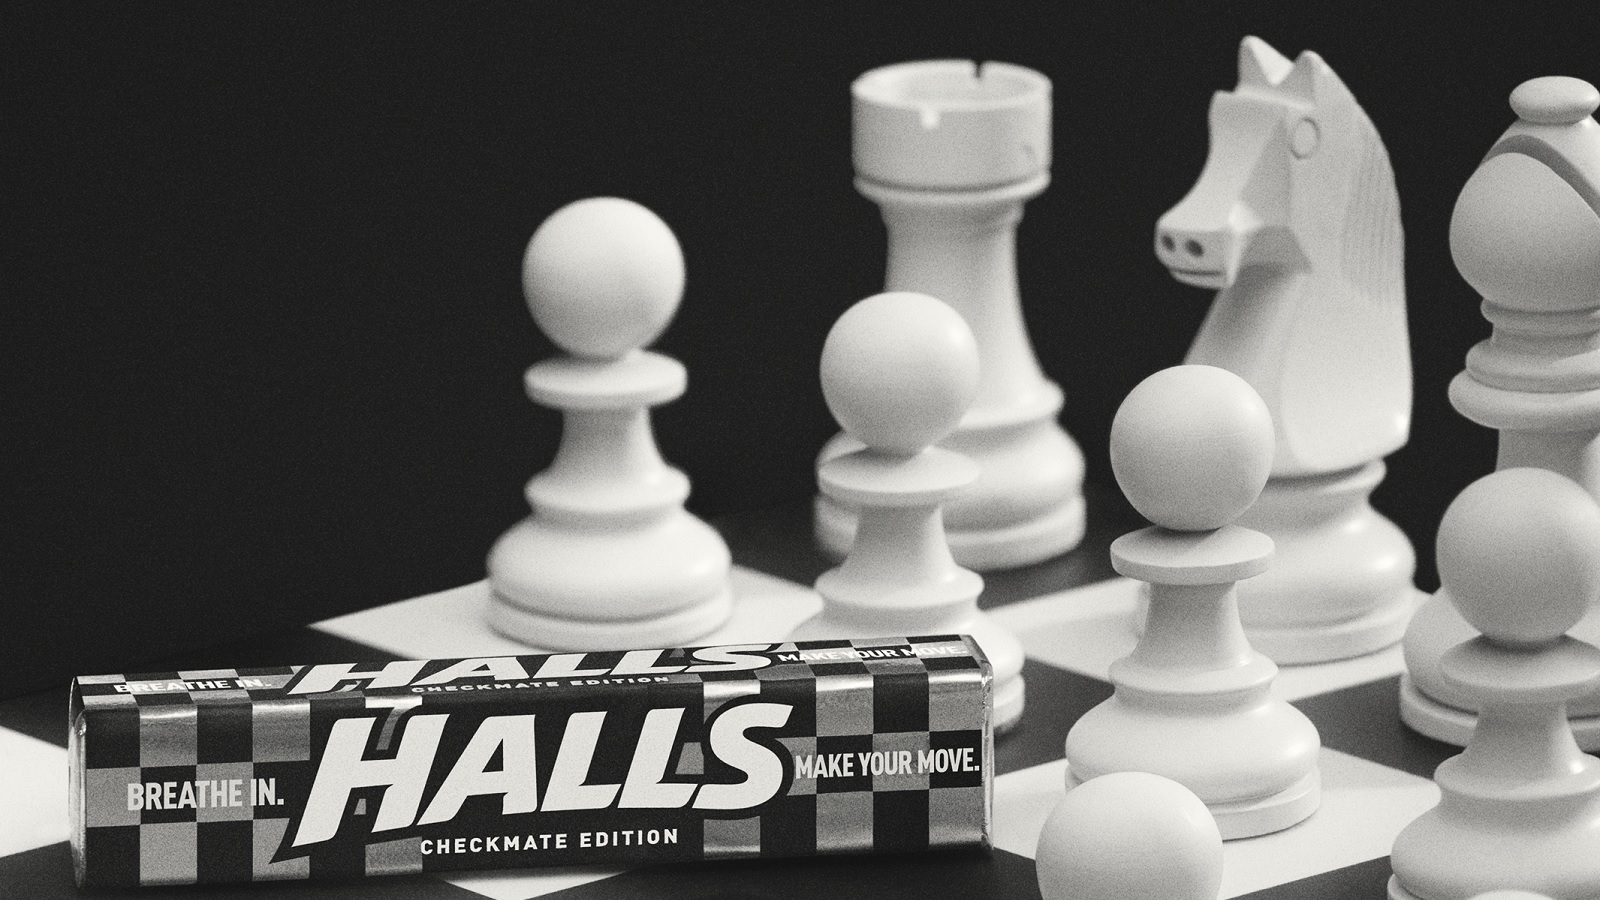 Famous Chess Openings Are Revealed Inside Halls’ Candies